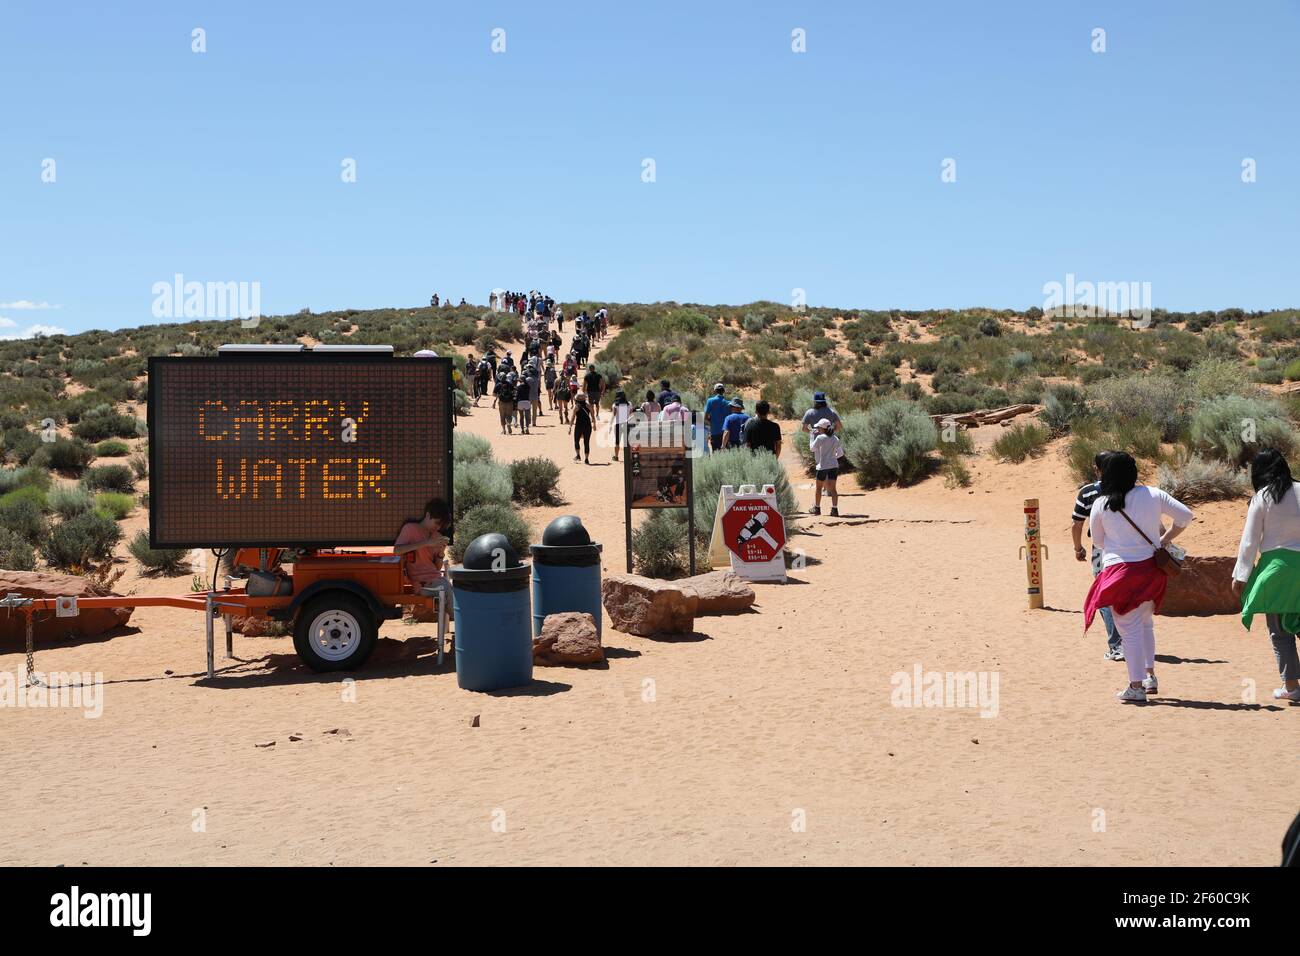 Procession of people passing a sign that warns to carry water; they are nevertheless following each other towards the horizon; global warming concept Stock Photo